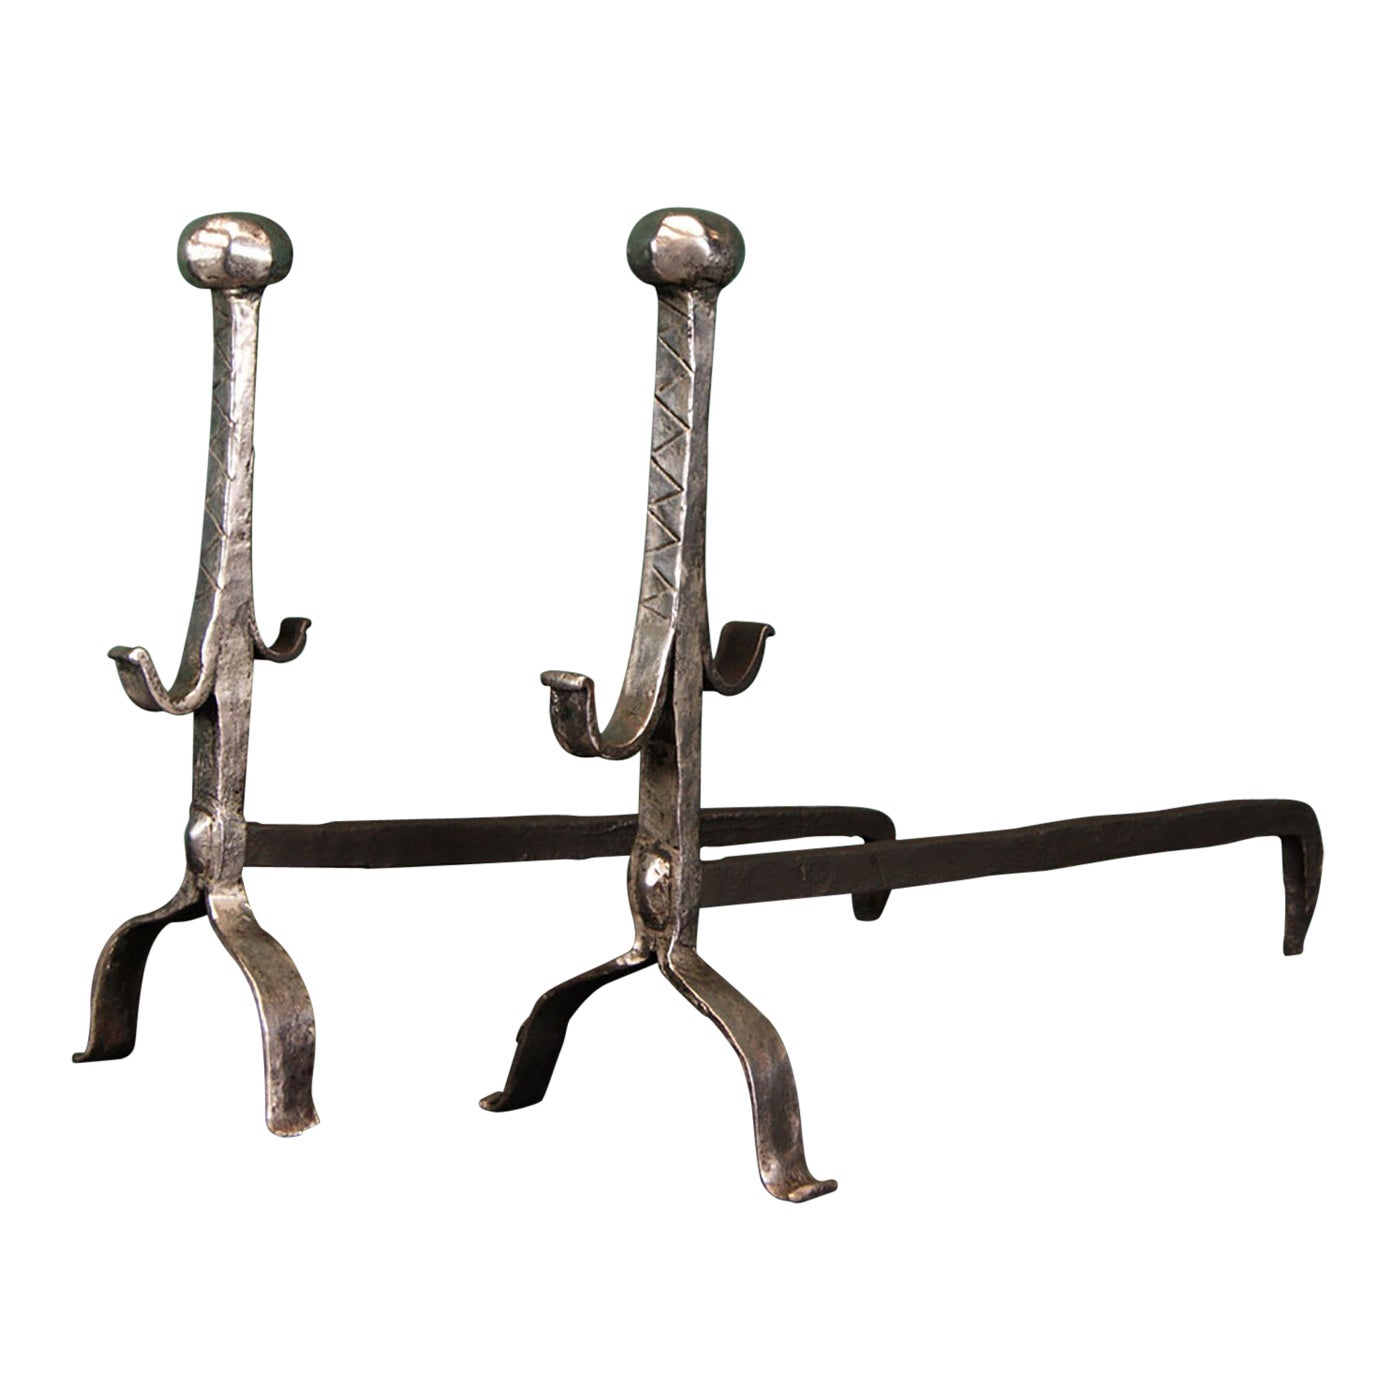 A Pair of Early 19th Century Polished Wrought-Iron Fireplace Andirons For Sale